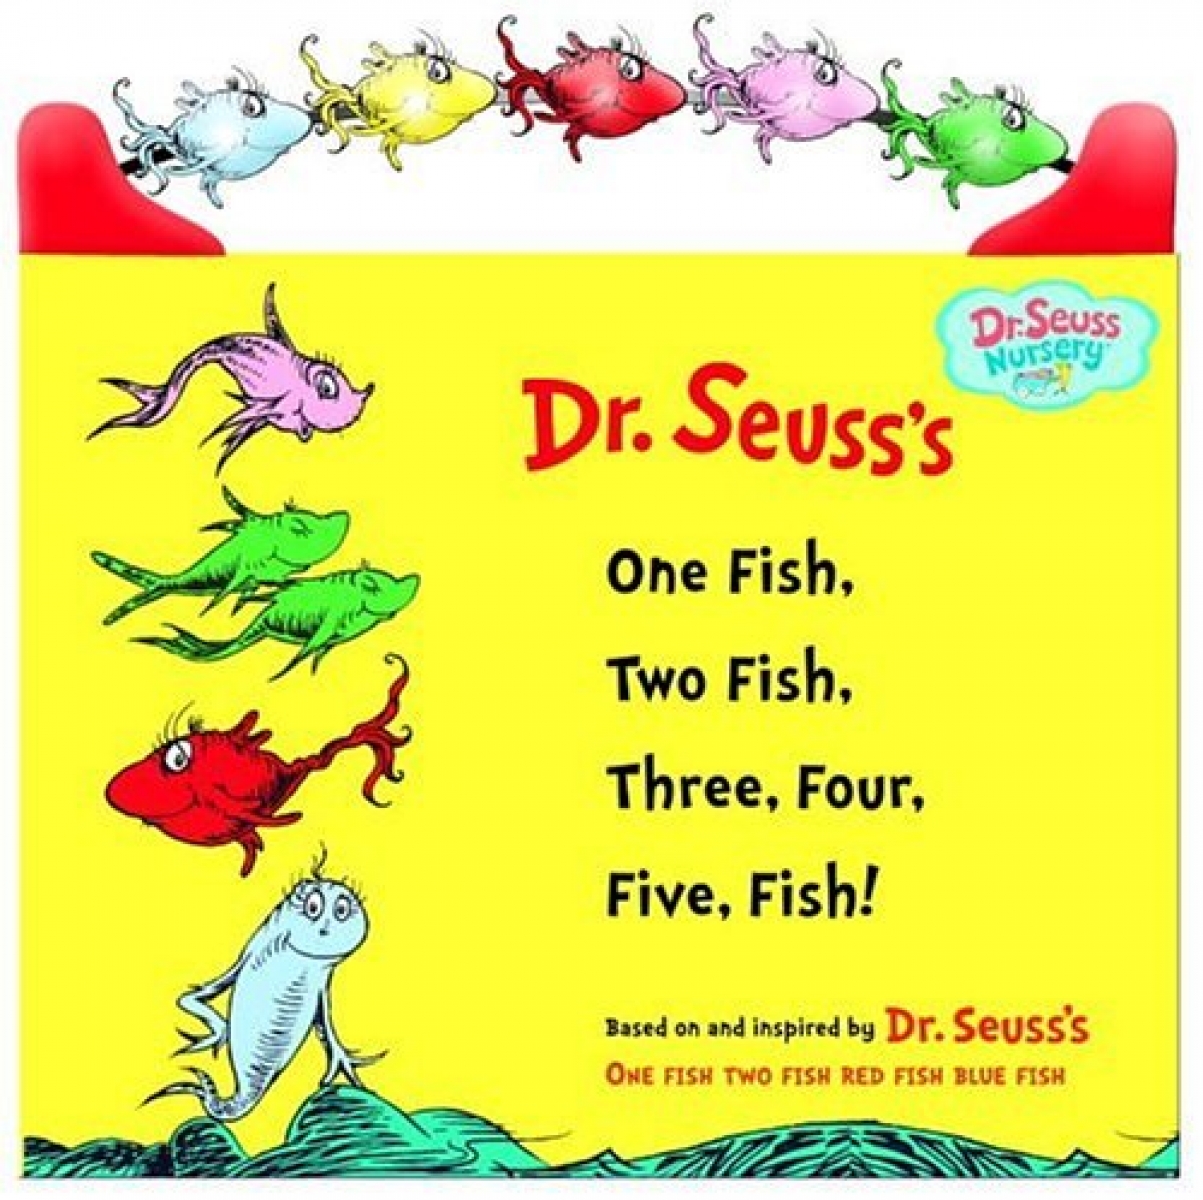 Dr Seuss One Fish, Two Fish, Three, Four, Five Fish 